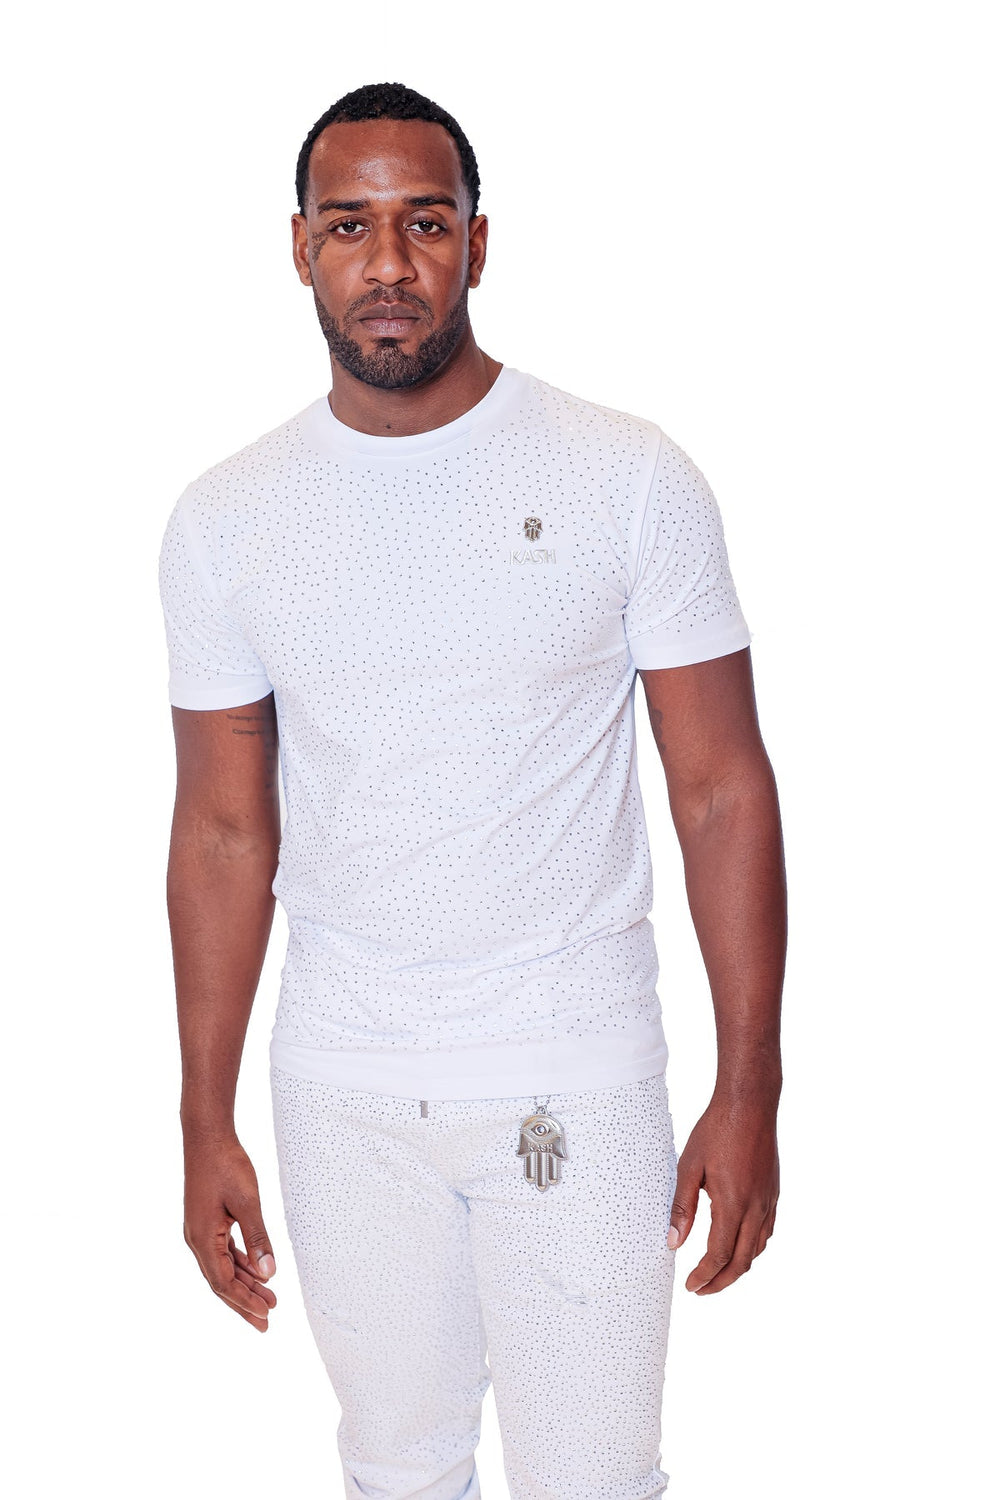 Kash White Tee Shirt W/Clear Crystals